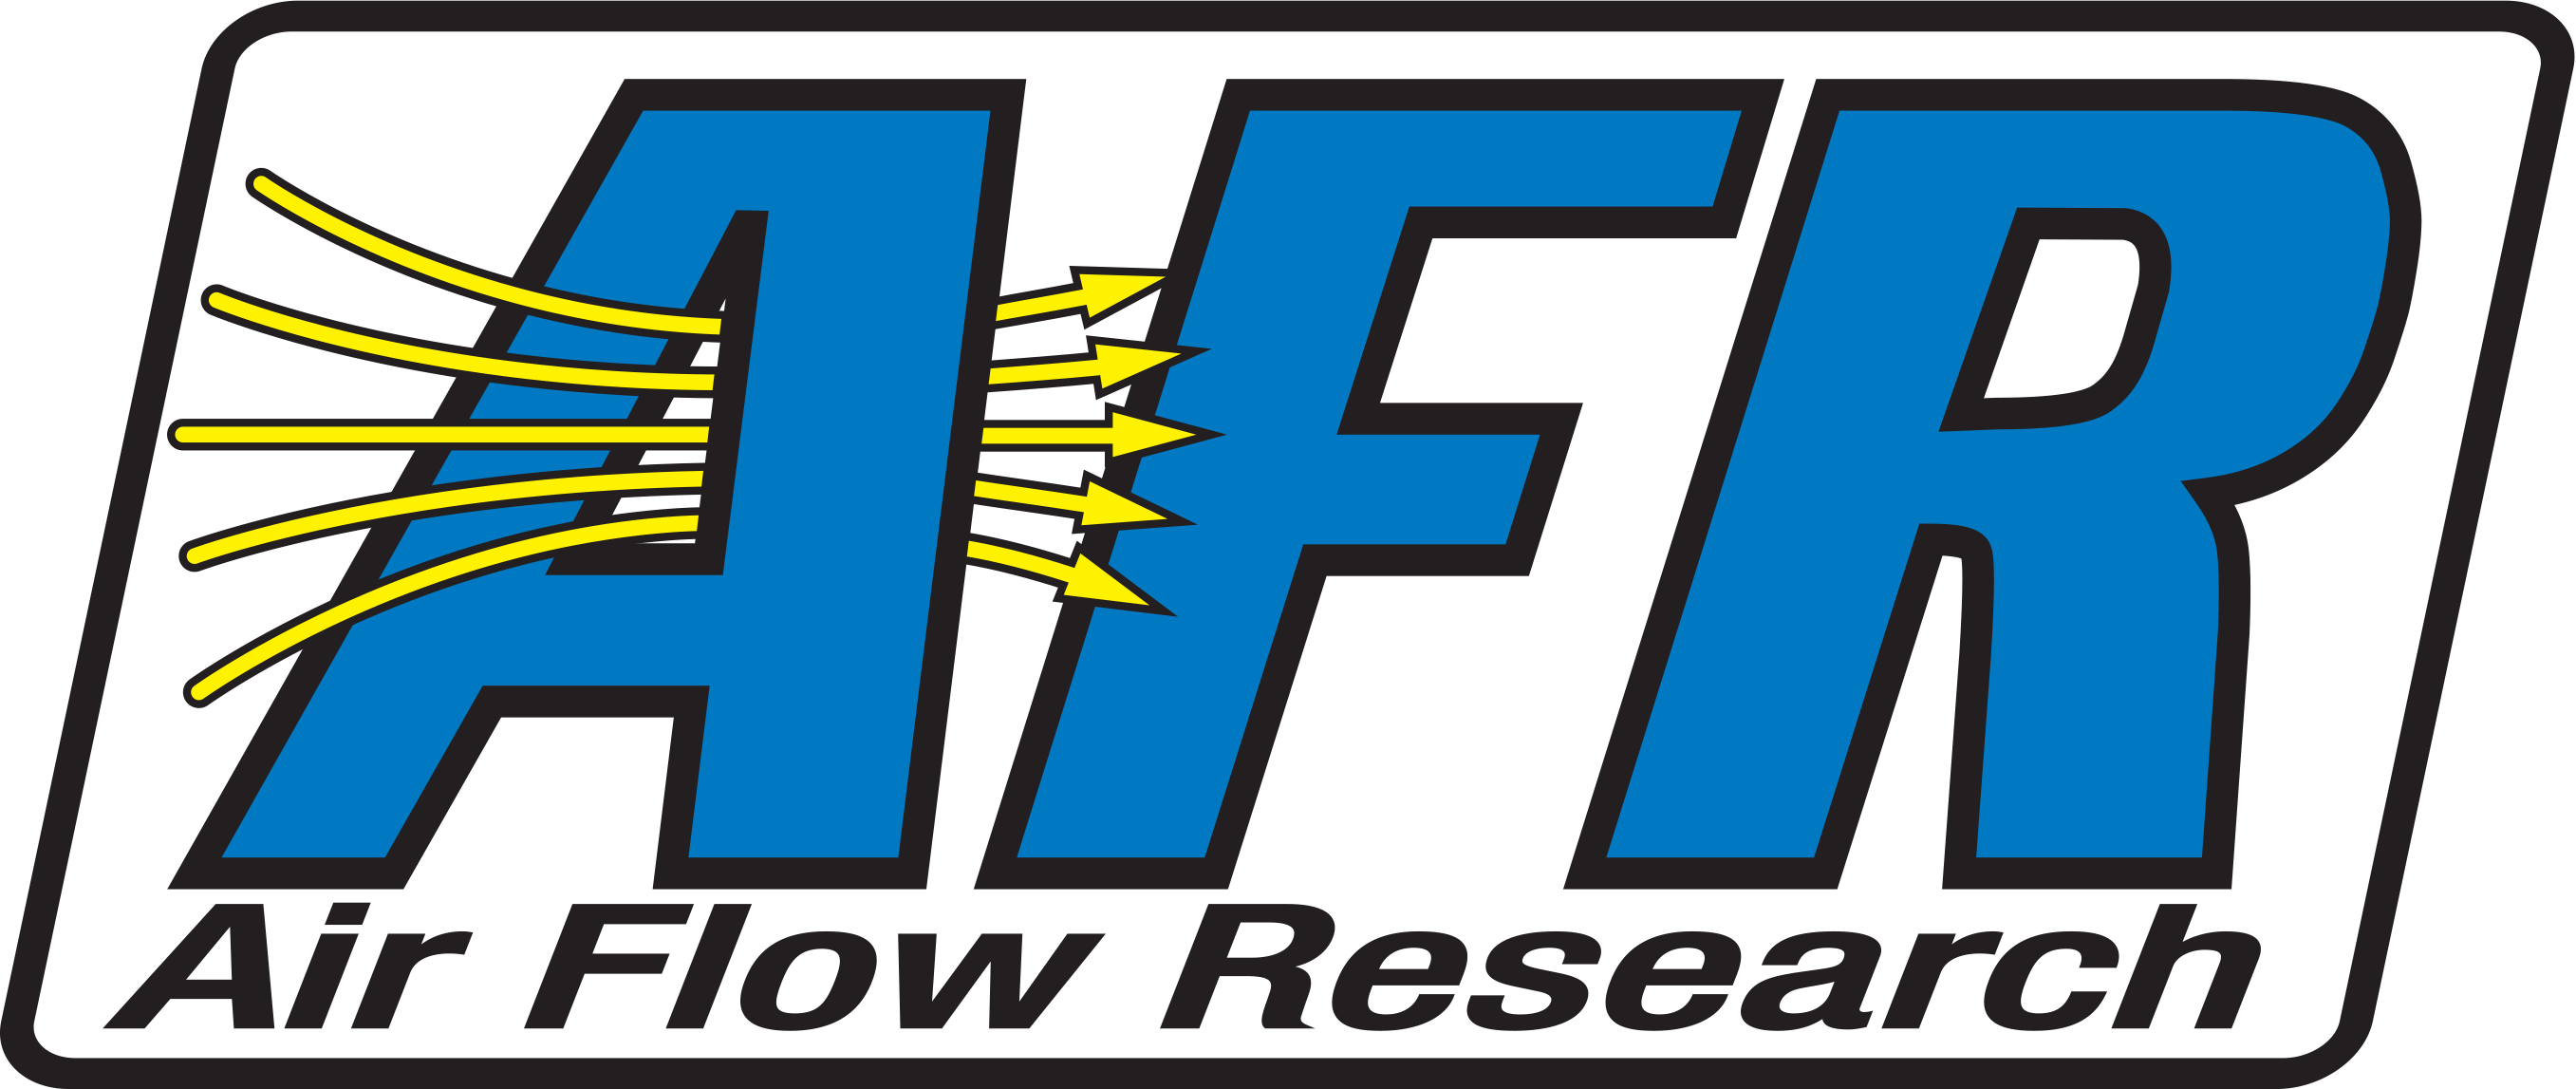 Air Flow Research (9743) Apparel/Promotional